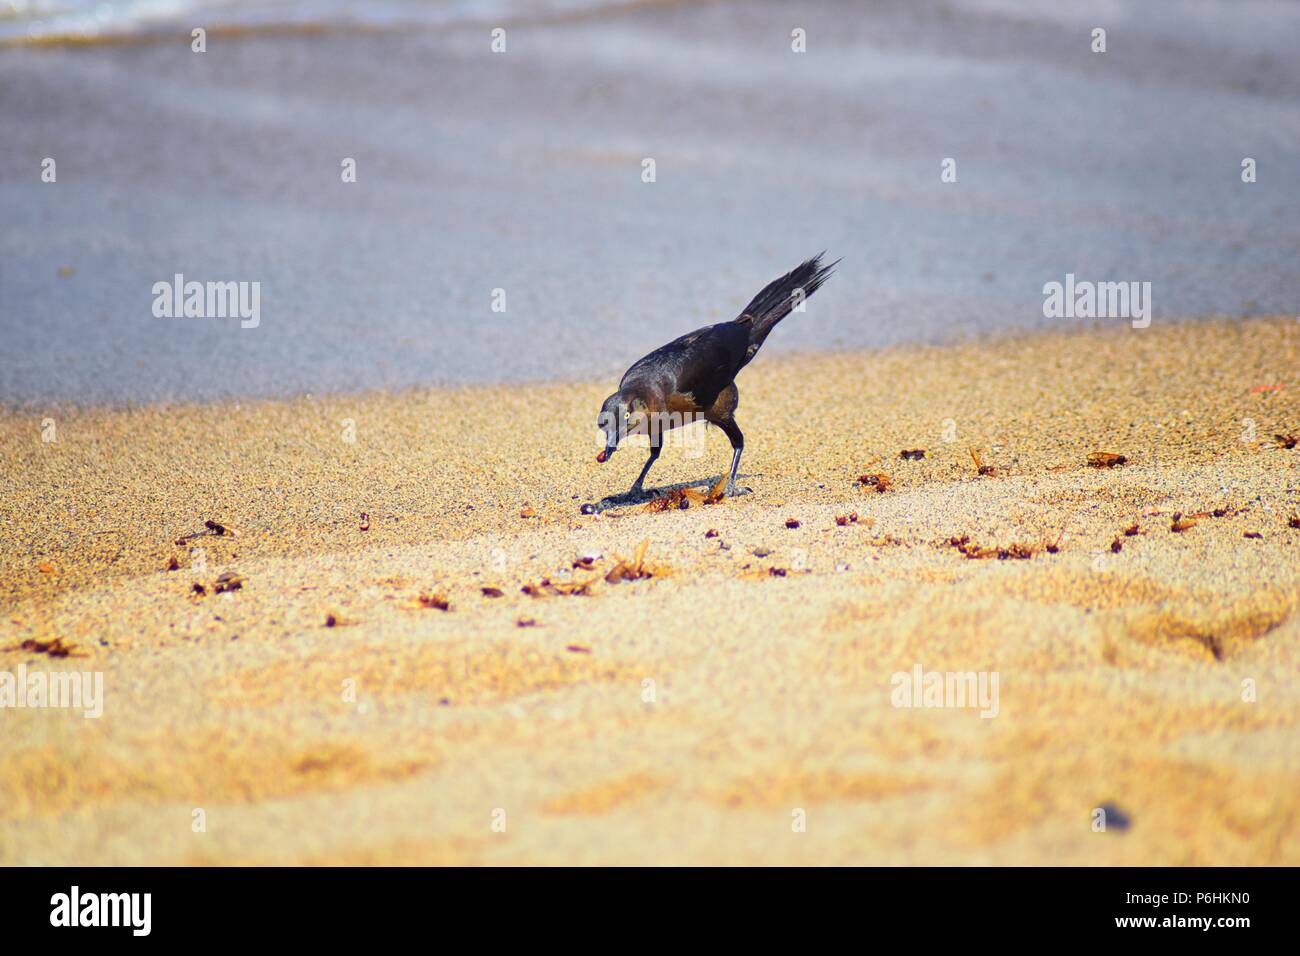 Great-tailed Grackle birds eating Winged Male Drone Leafcutter ants, dying on beach after mating flight with queen in Puerto Vallarta Mexico. Scientif Stock Photo